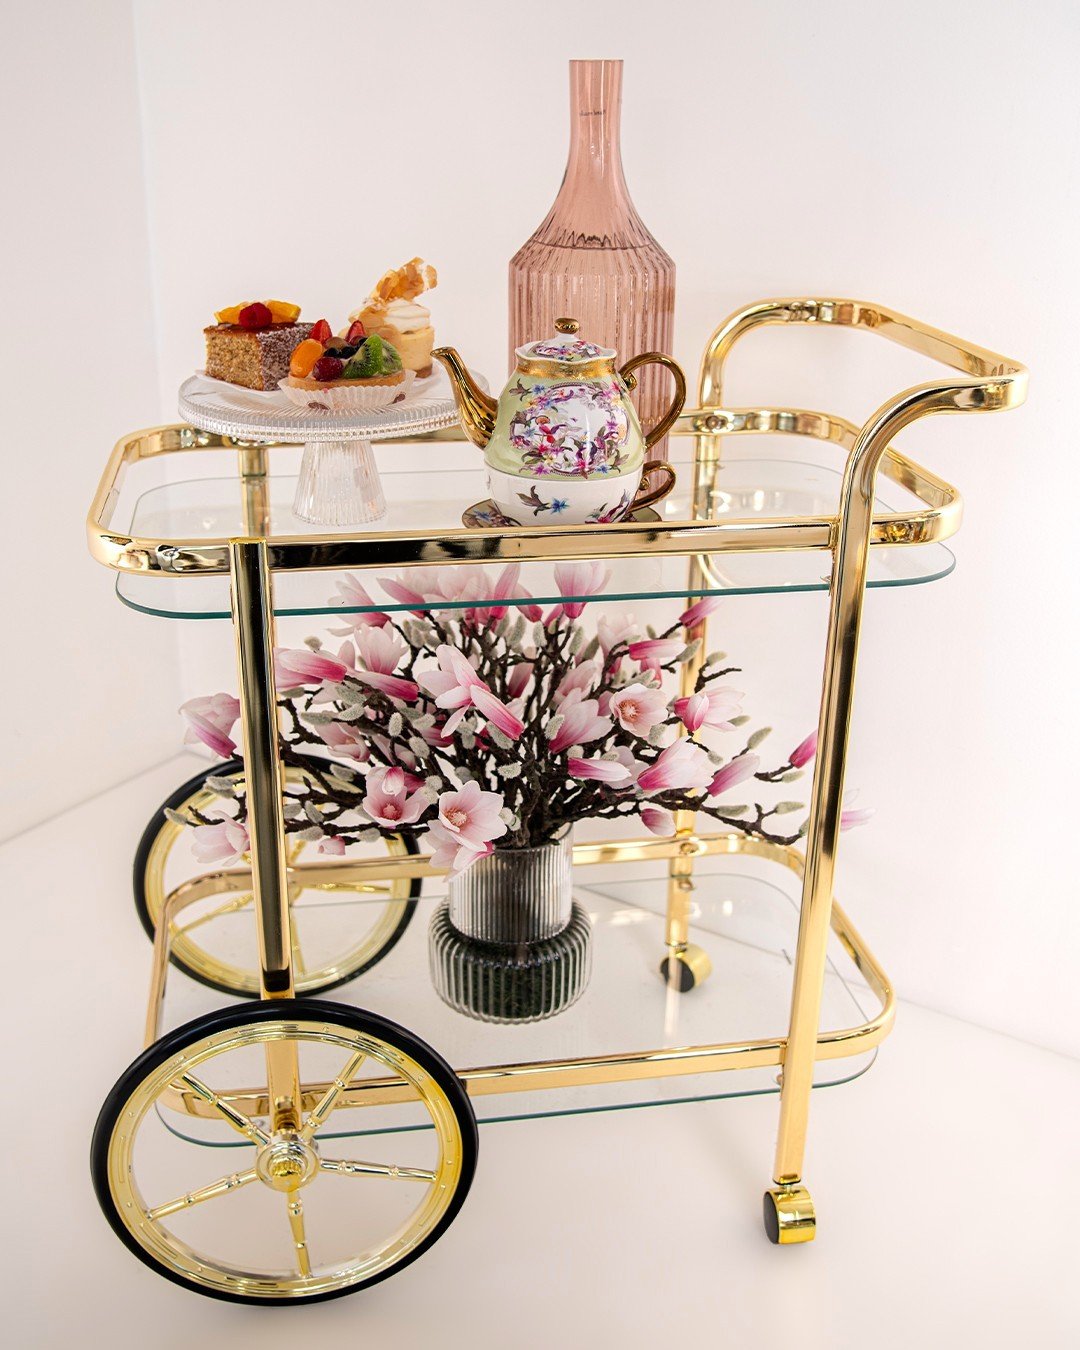 🍹Sip in Style
Our most wanted Bar Carts are back in Stock❗
☎️Please contact your sales representative to make an appointment to visit our showroom or shop online today. Limited stocks available. 

@tandsagencies
@swinggifts_nsw
@montageagencies
@pur